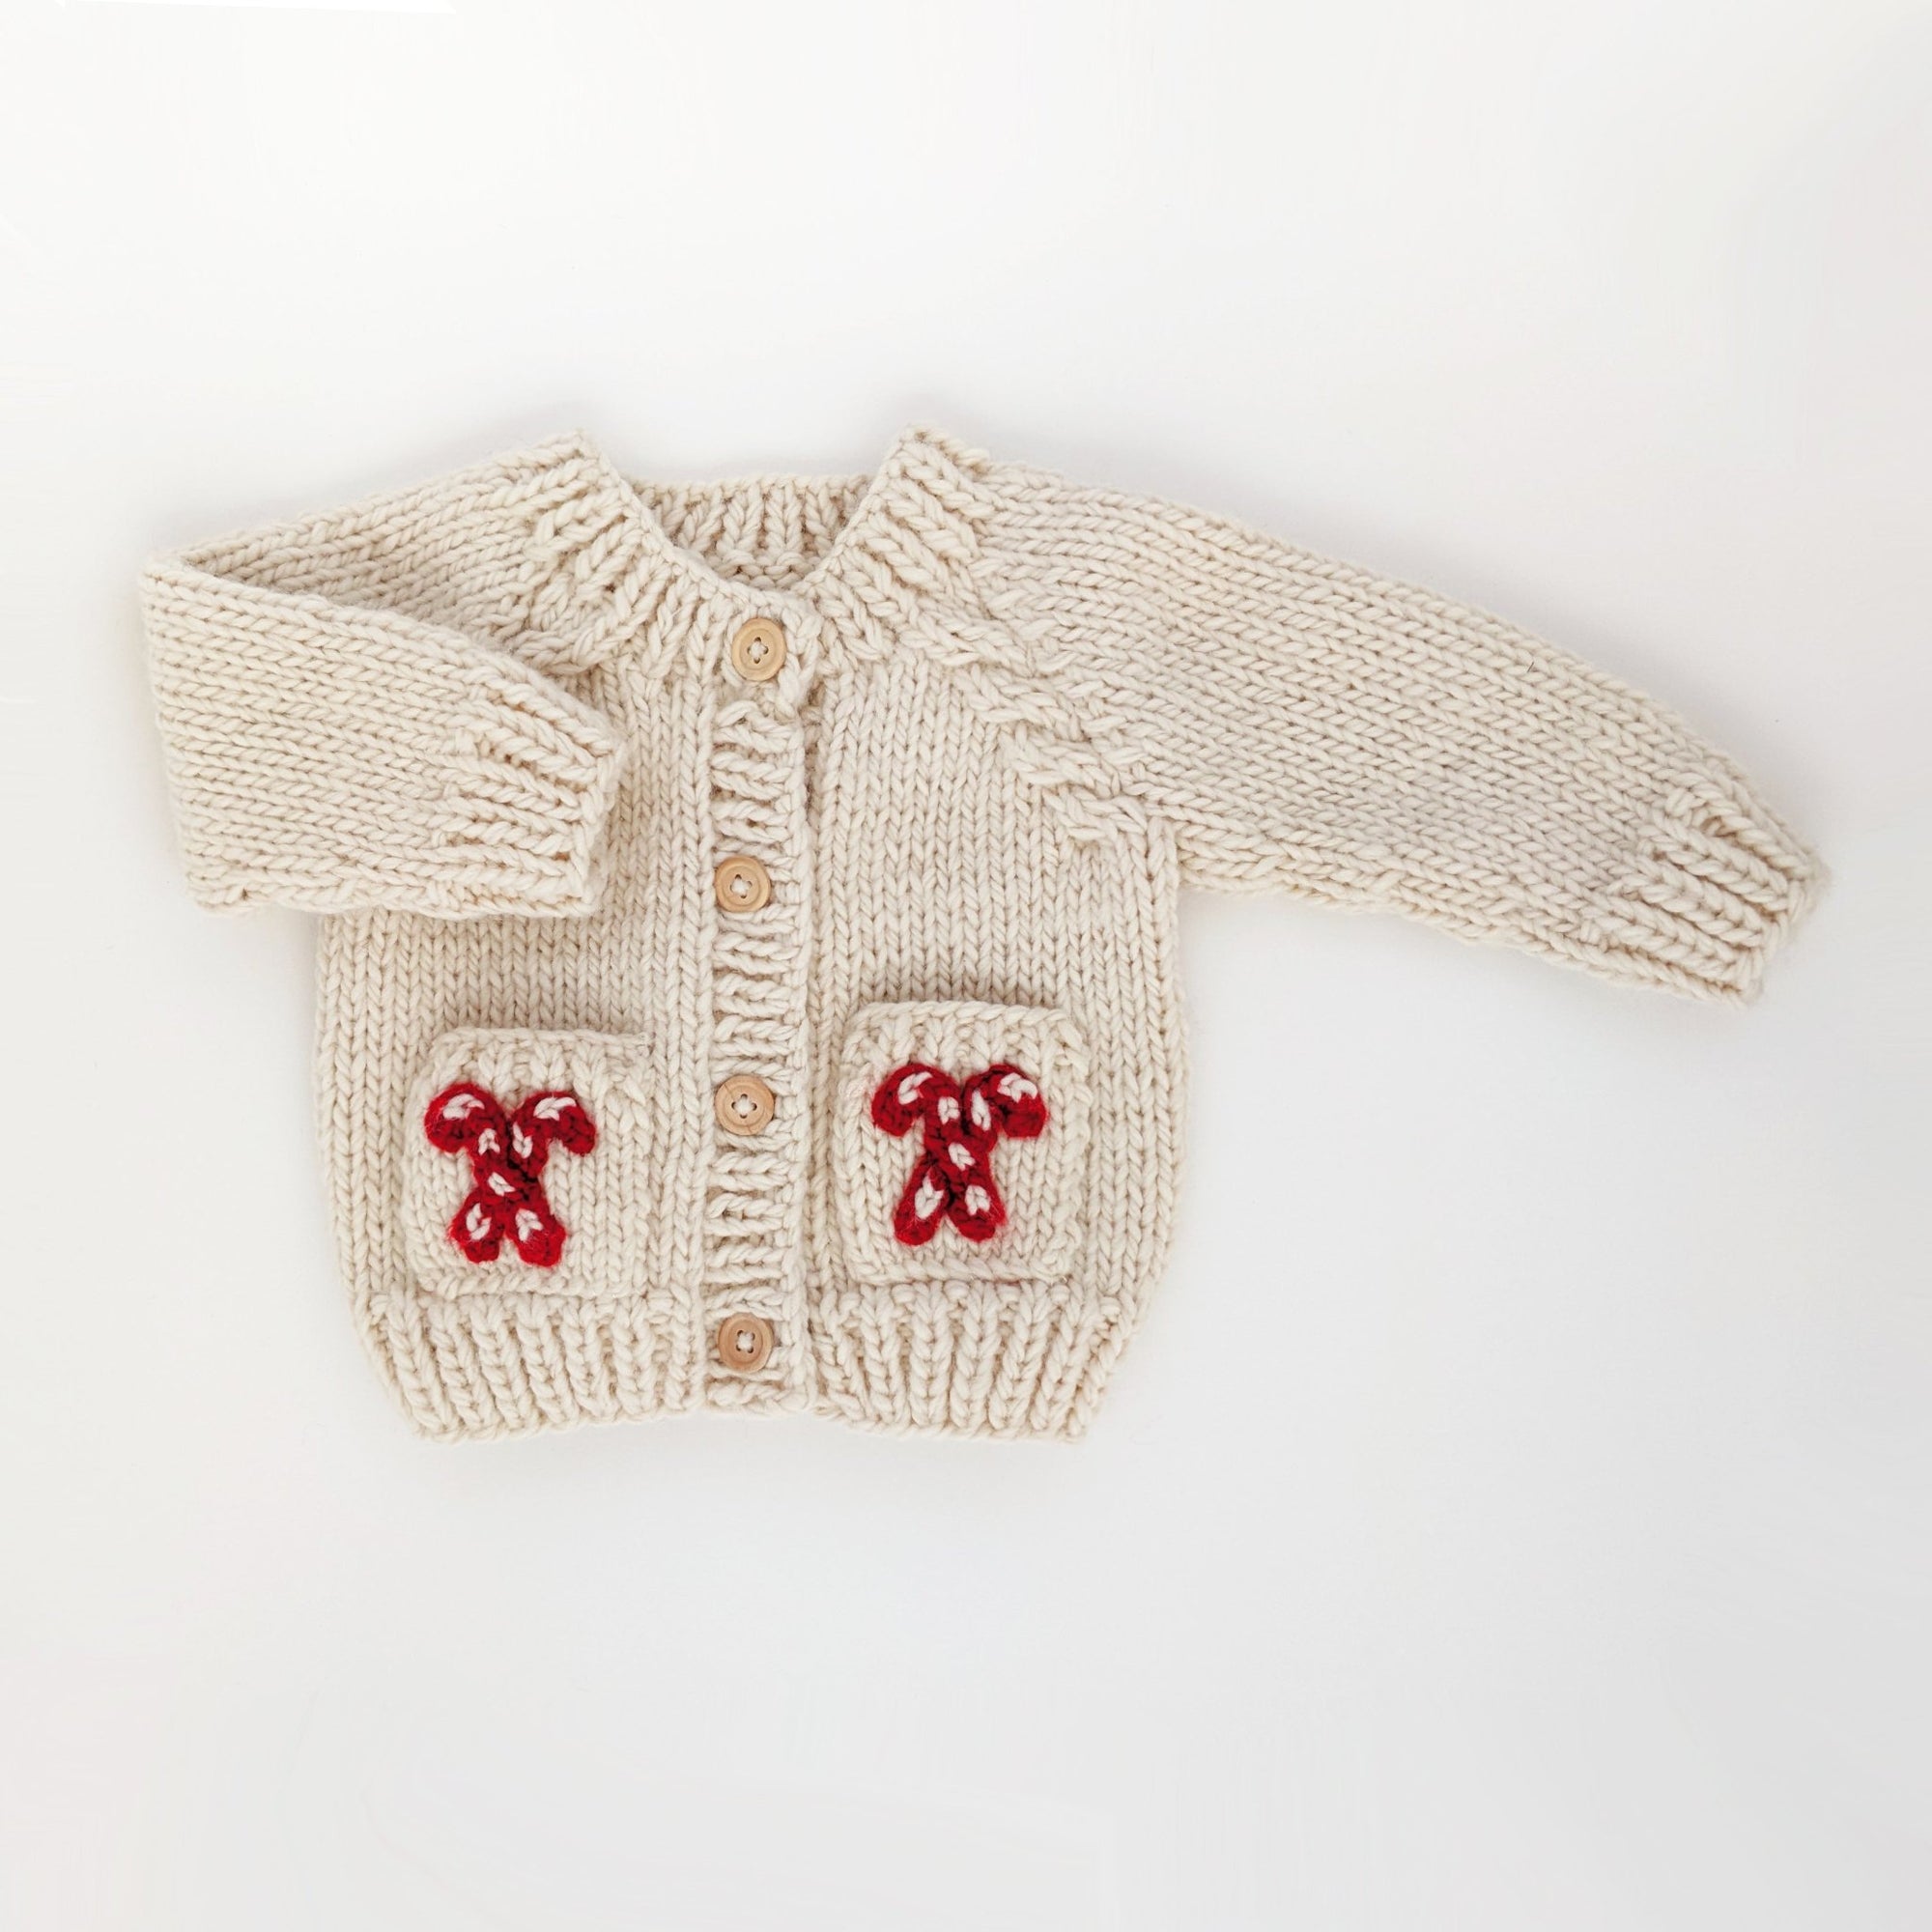 Candy Cane Cardigan Sweater due Jul/Aug - Sweaters